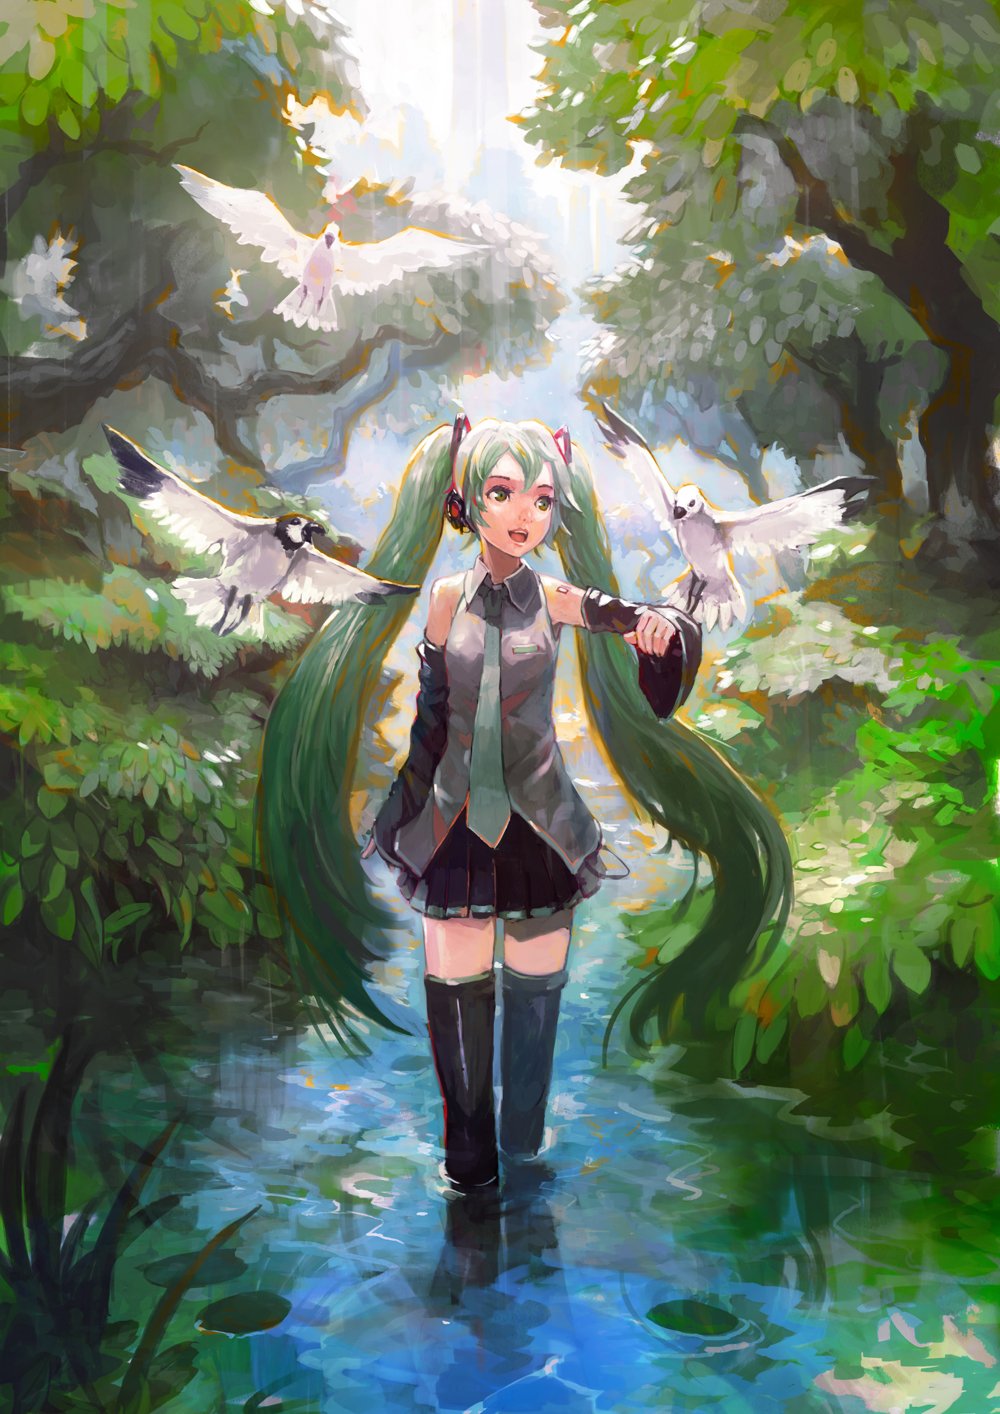 Vocaloid awesomeness